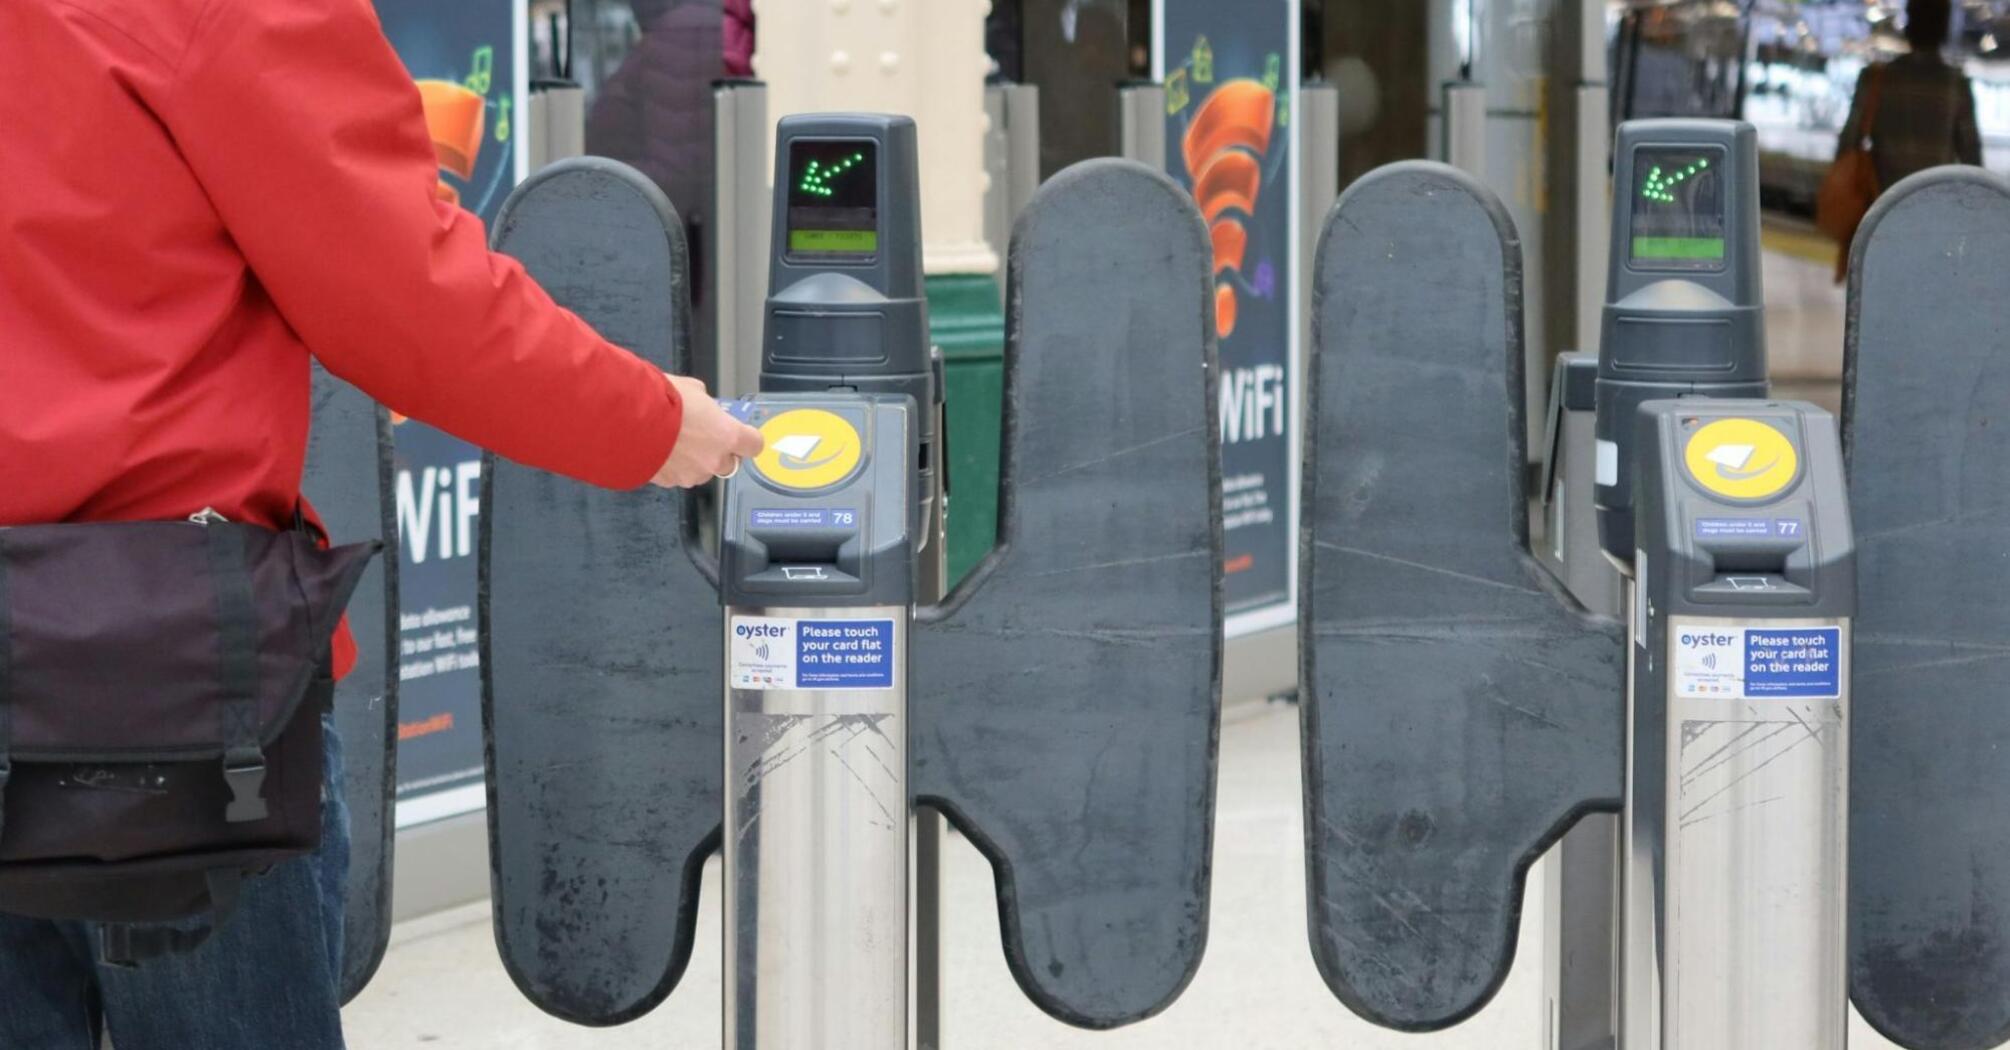 Person using a smart card to enter through a train station turnstile